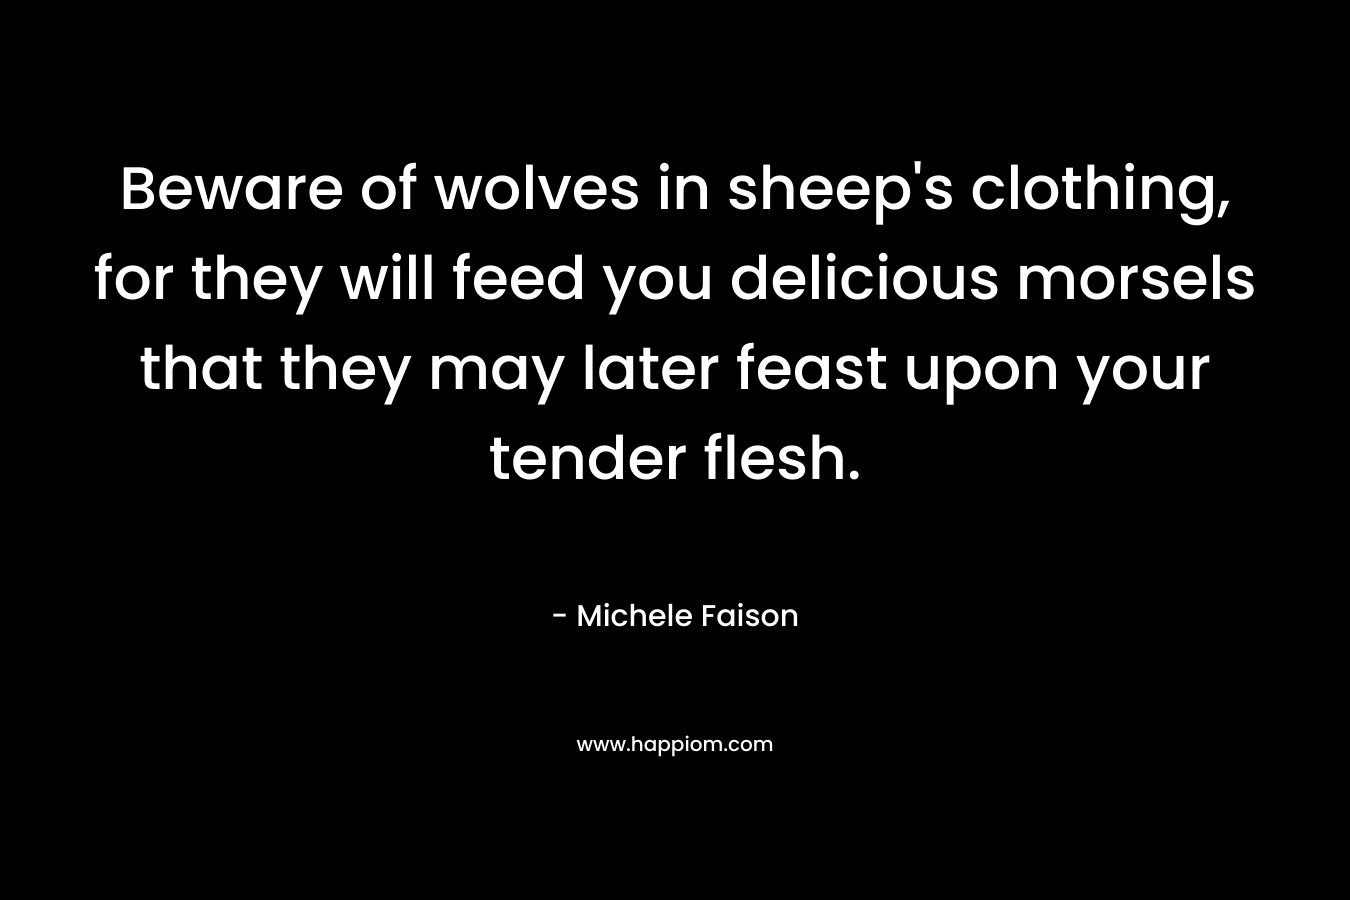 Beware of wolves in sheep's clothing, for they will feed you delicious morsels that they may later feast upon your tender flesh.